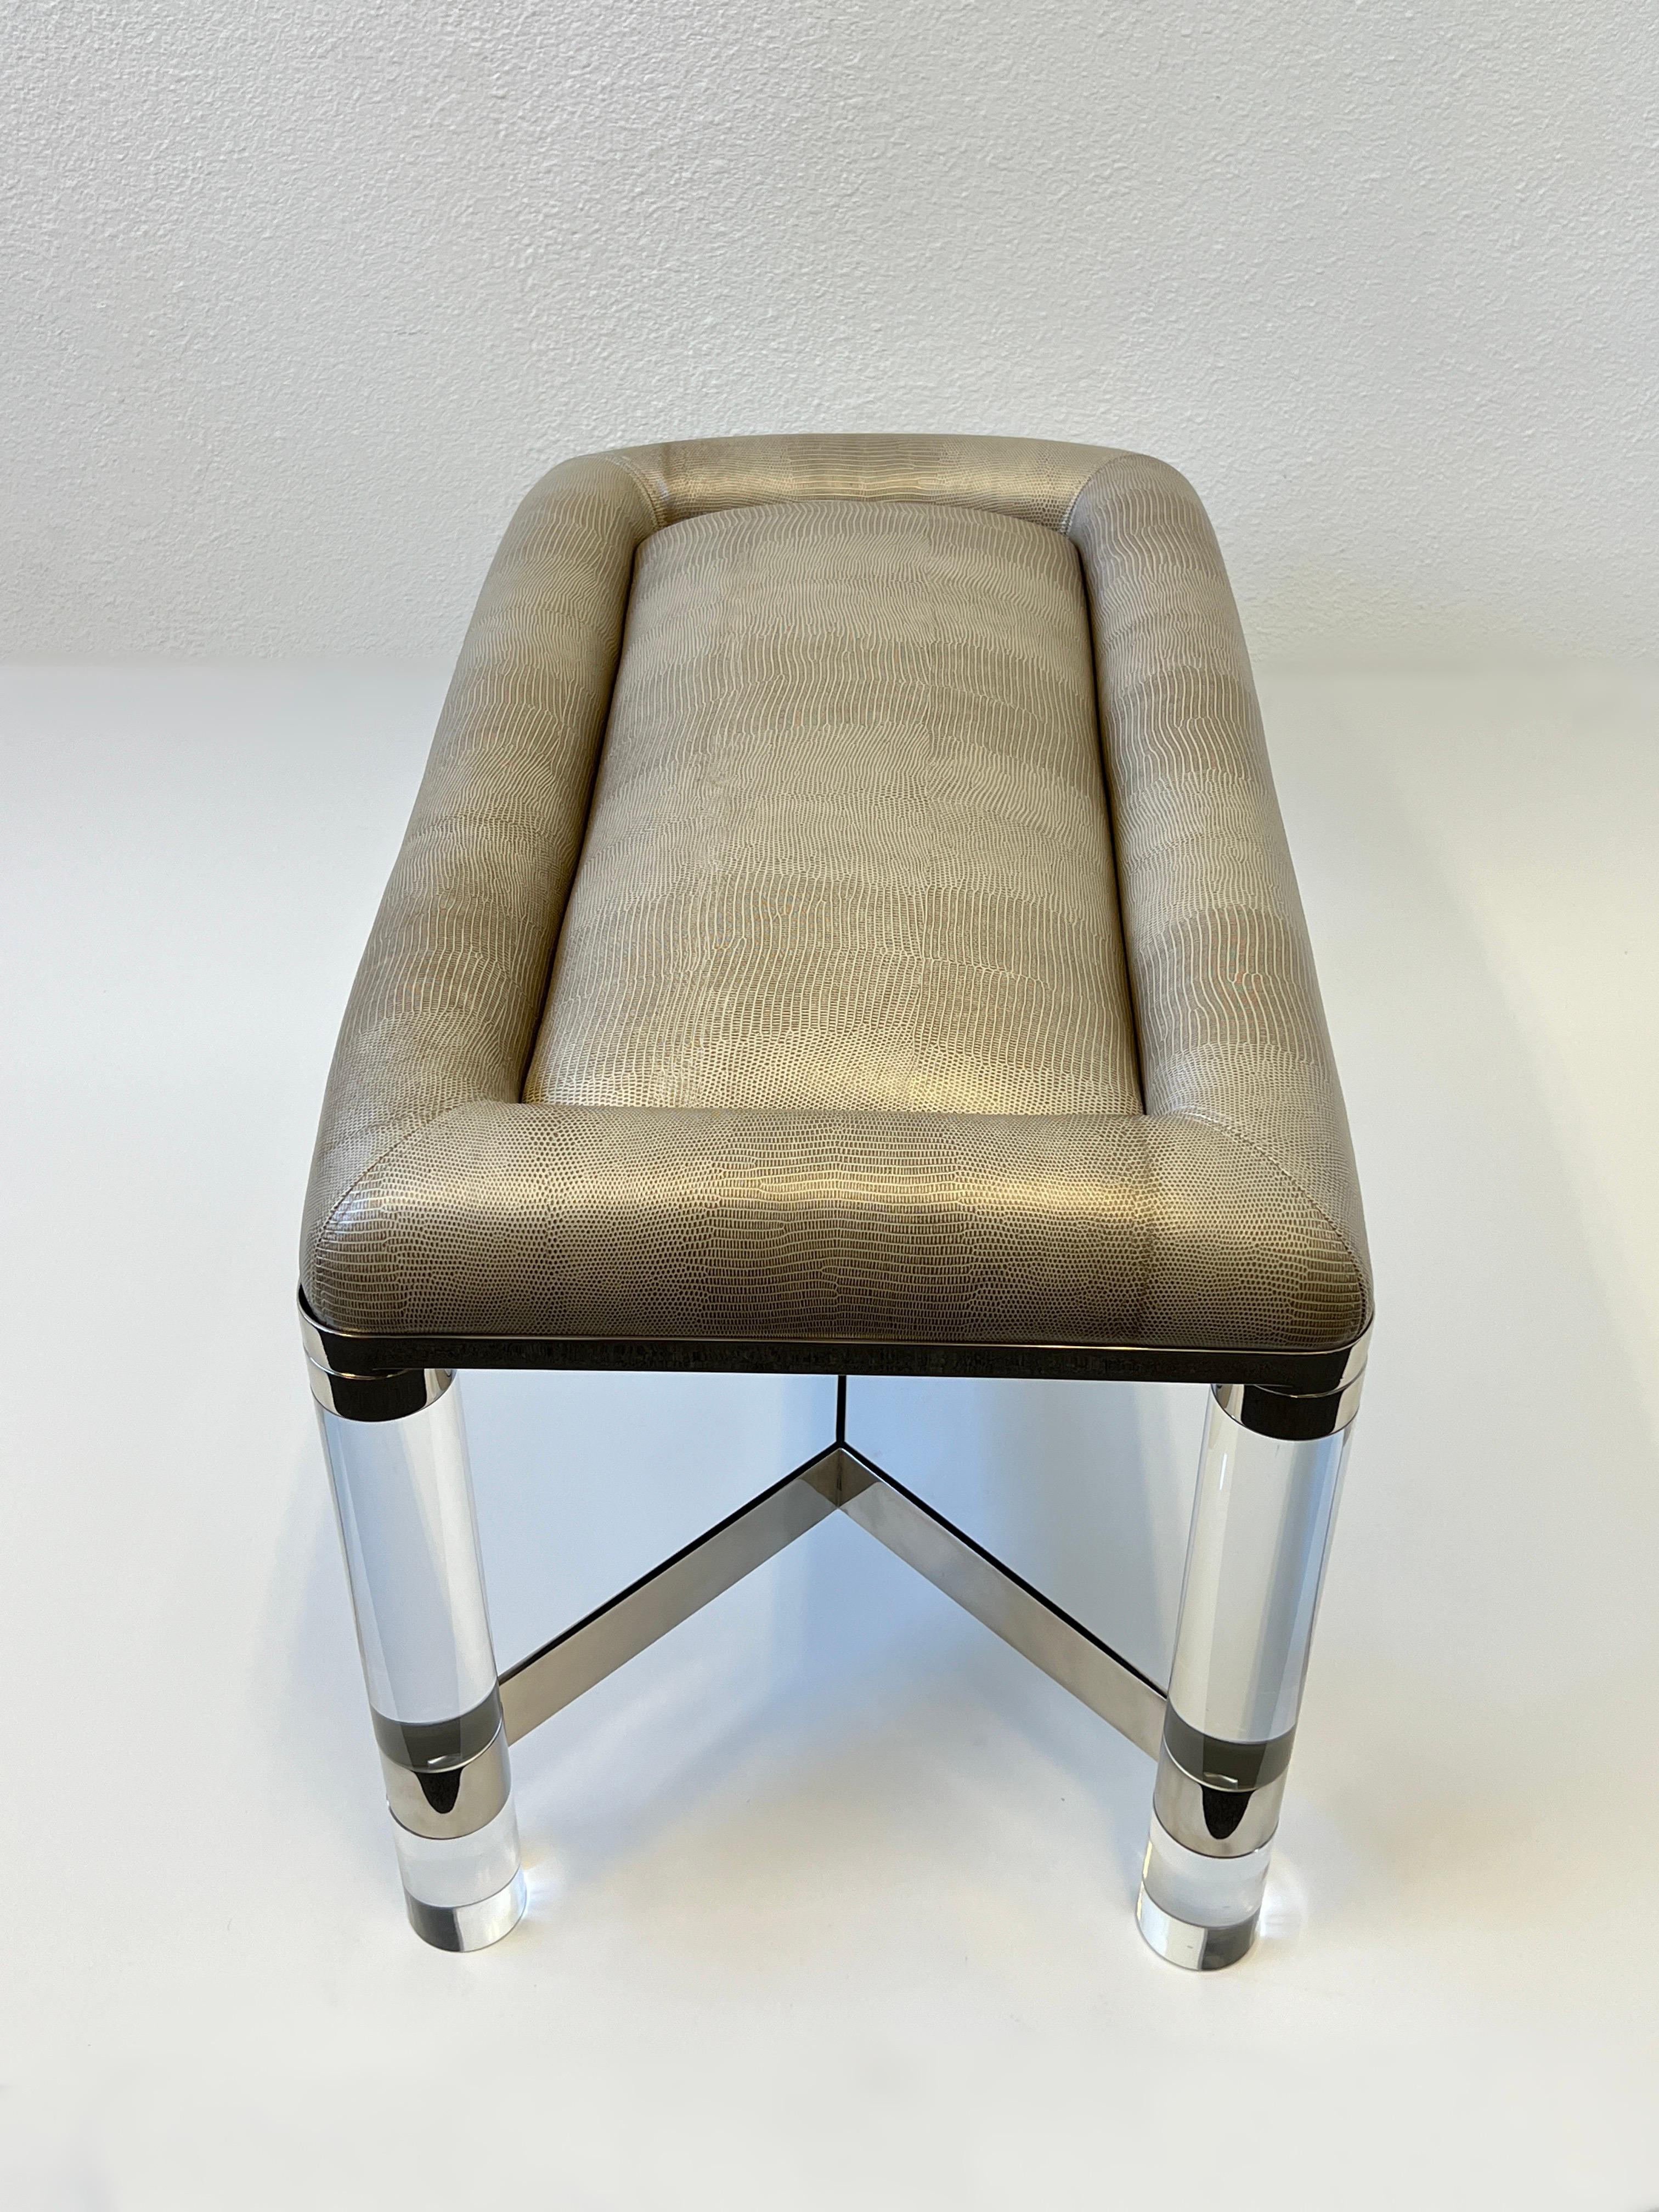 Late 20th Century Chrome and Lucite with Snakeskin Leather Bench by Karl Springer For Sale